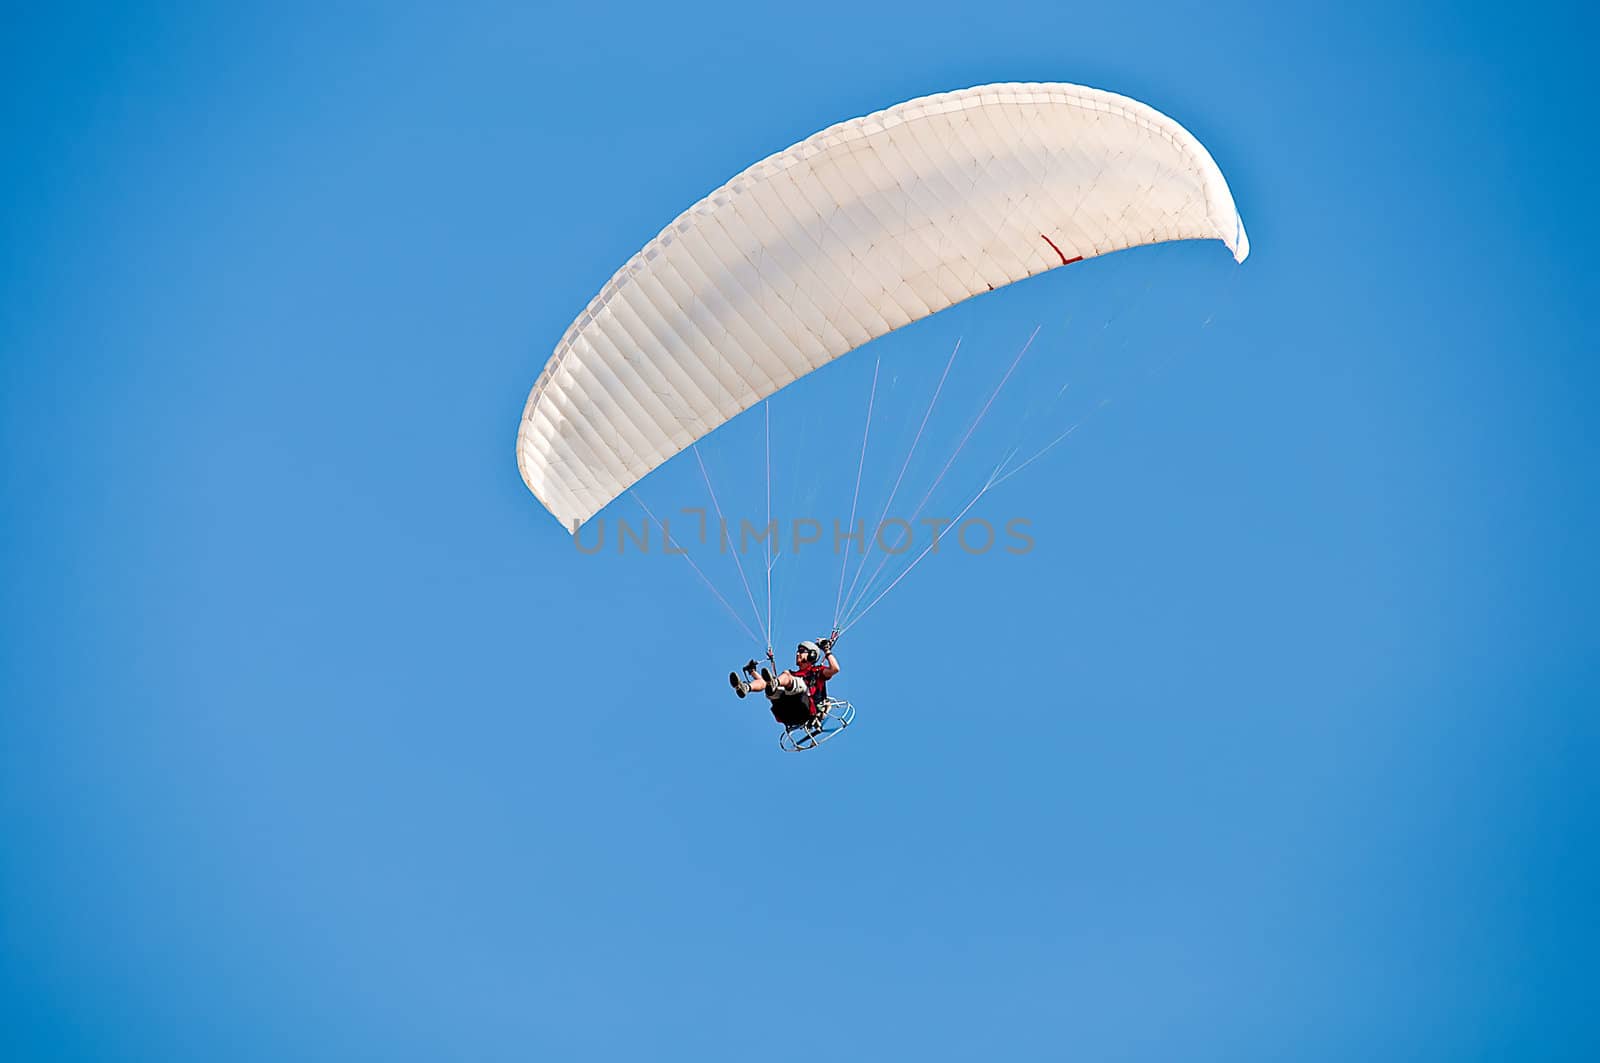 White hang glider in sky over blue sea .